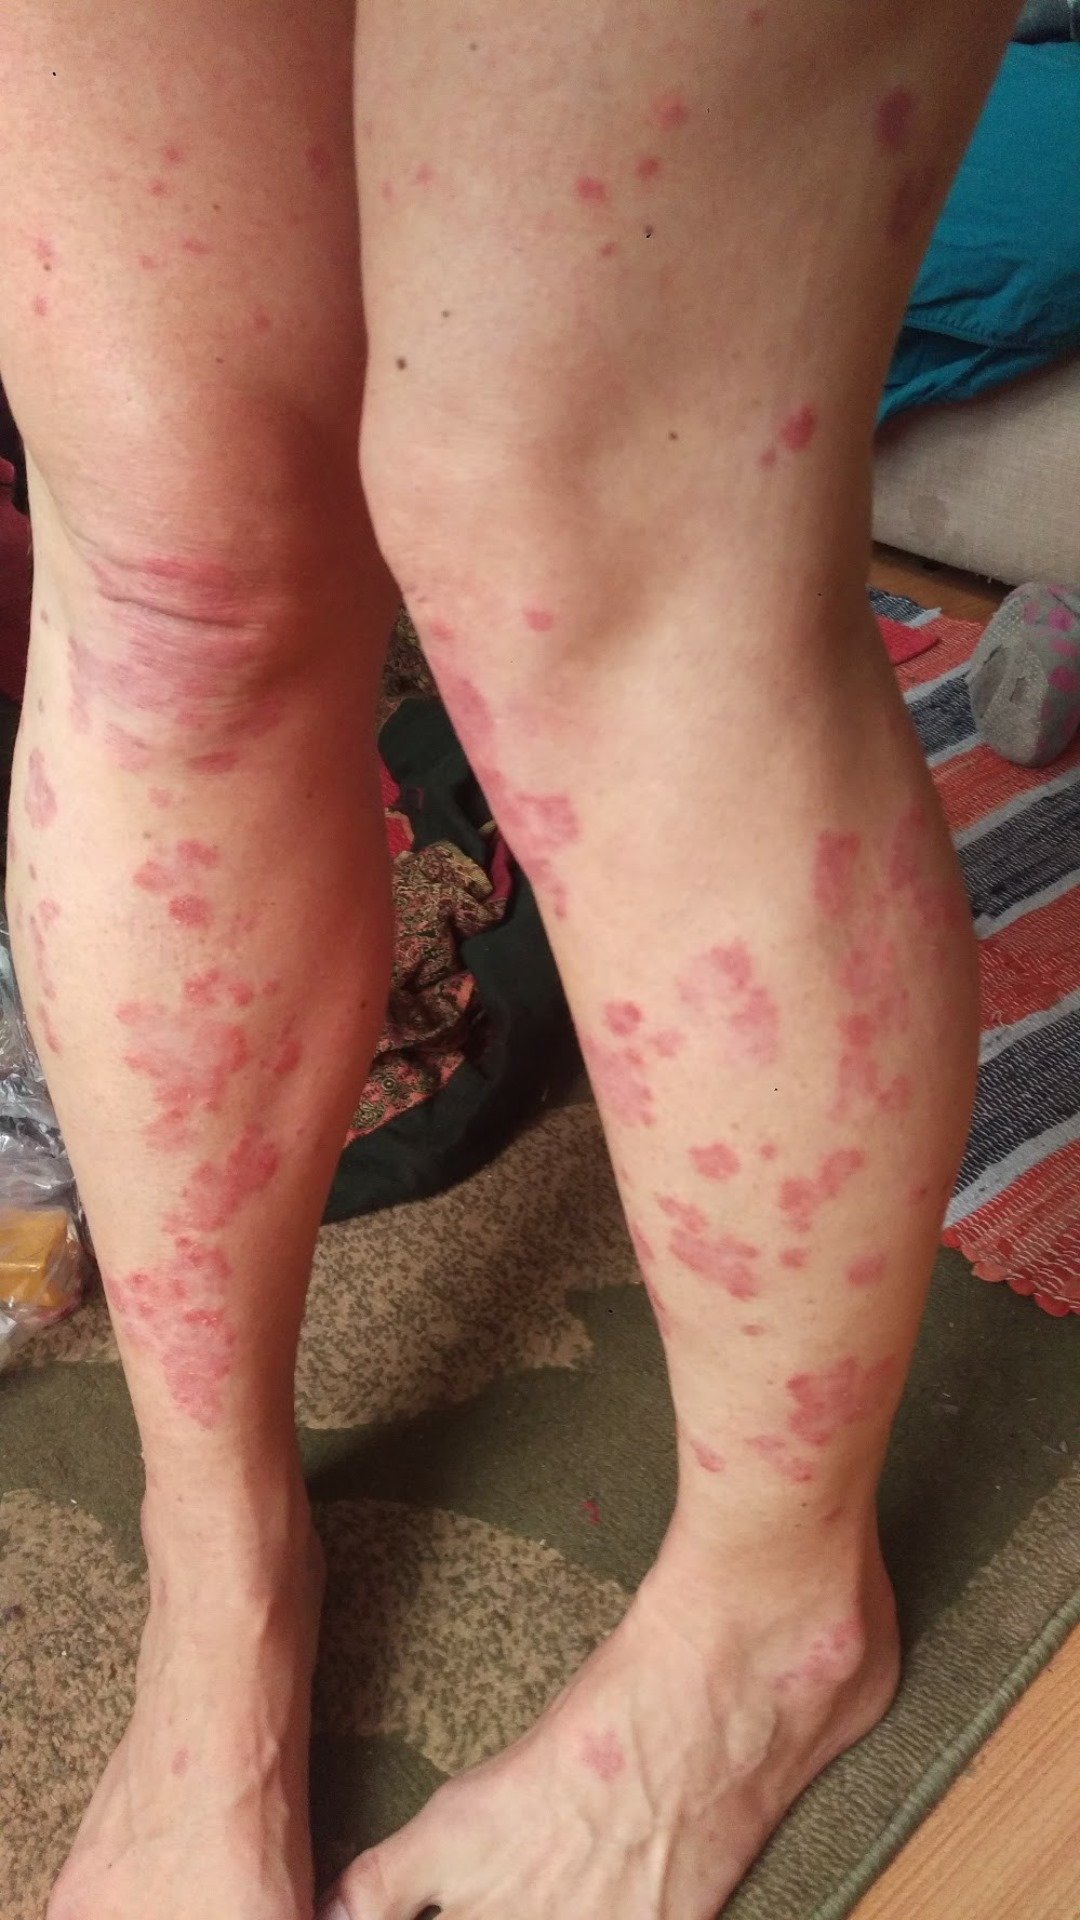 Keto Diet for Psoriasis Success Stories